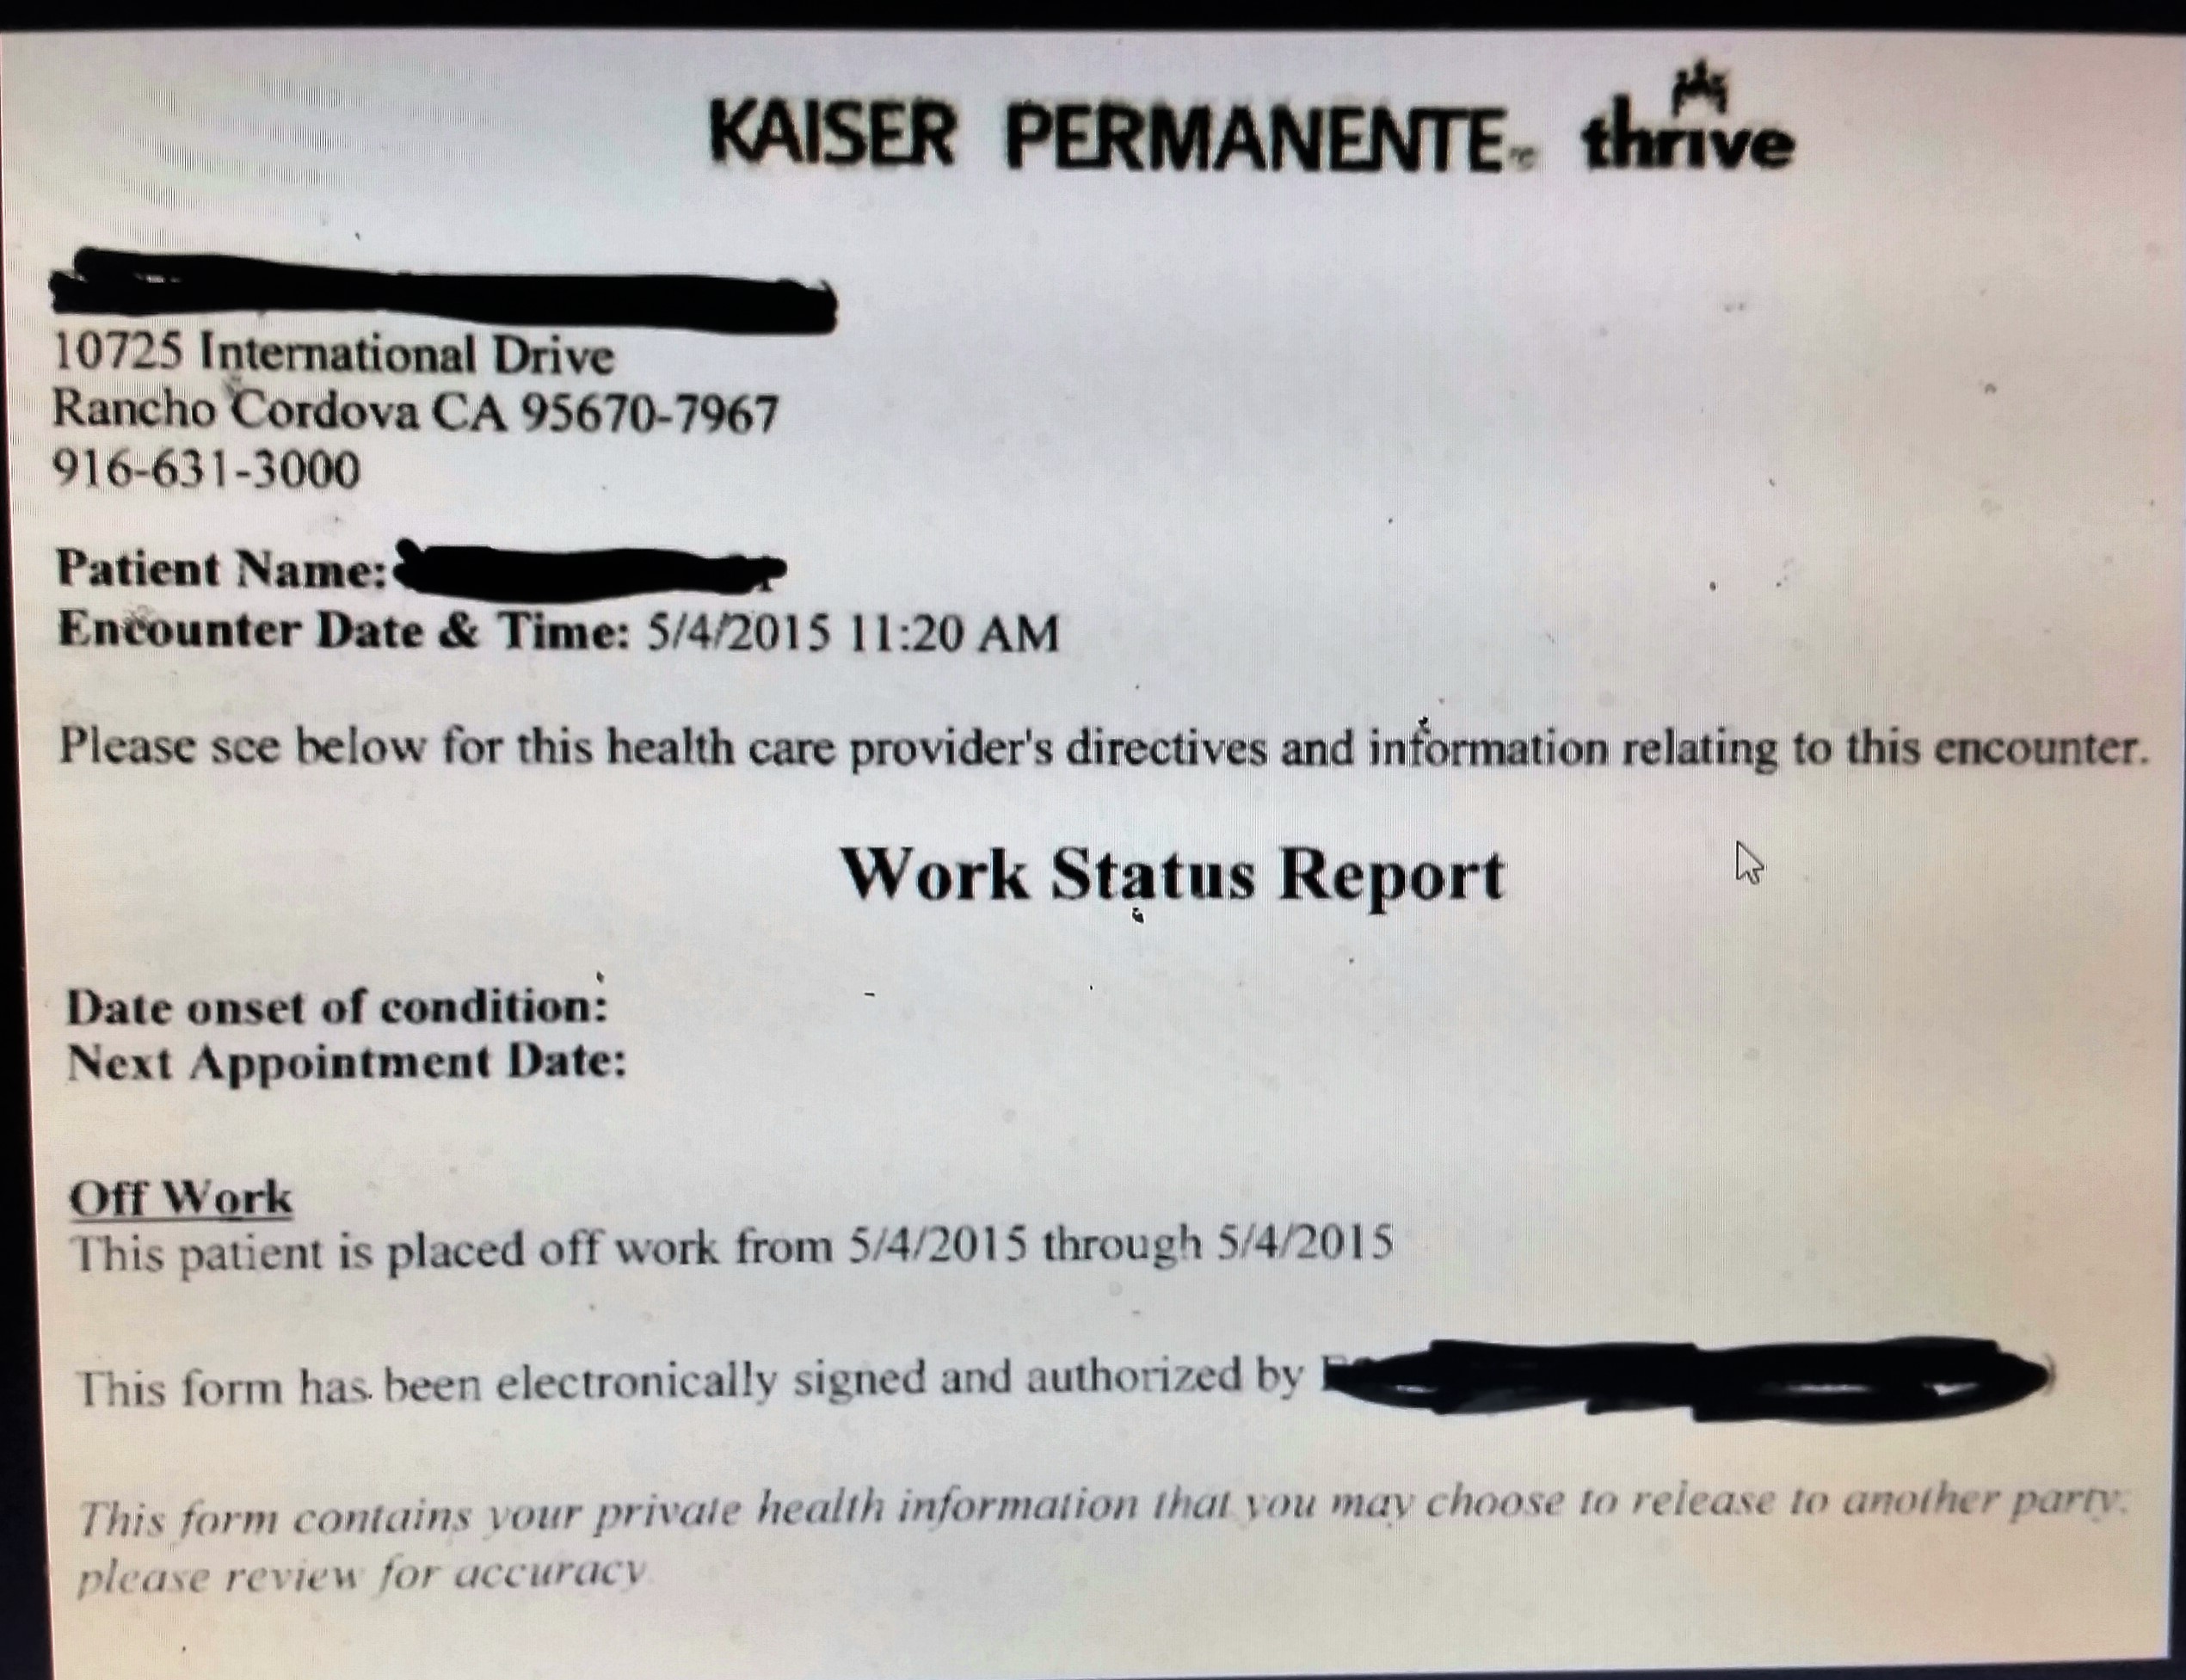 Work Status Report Note And ADA Protection (Disability Law) Inside Kaiser Doctors Note Template